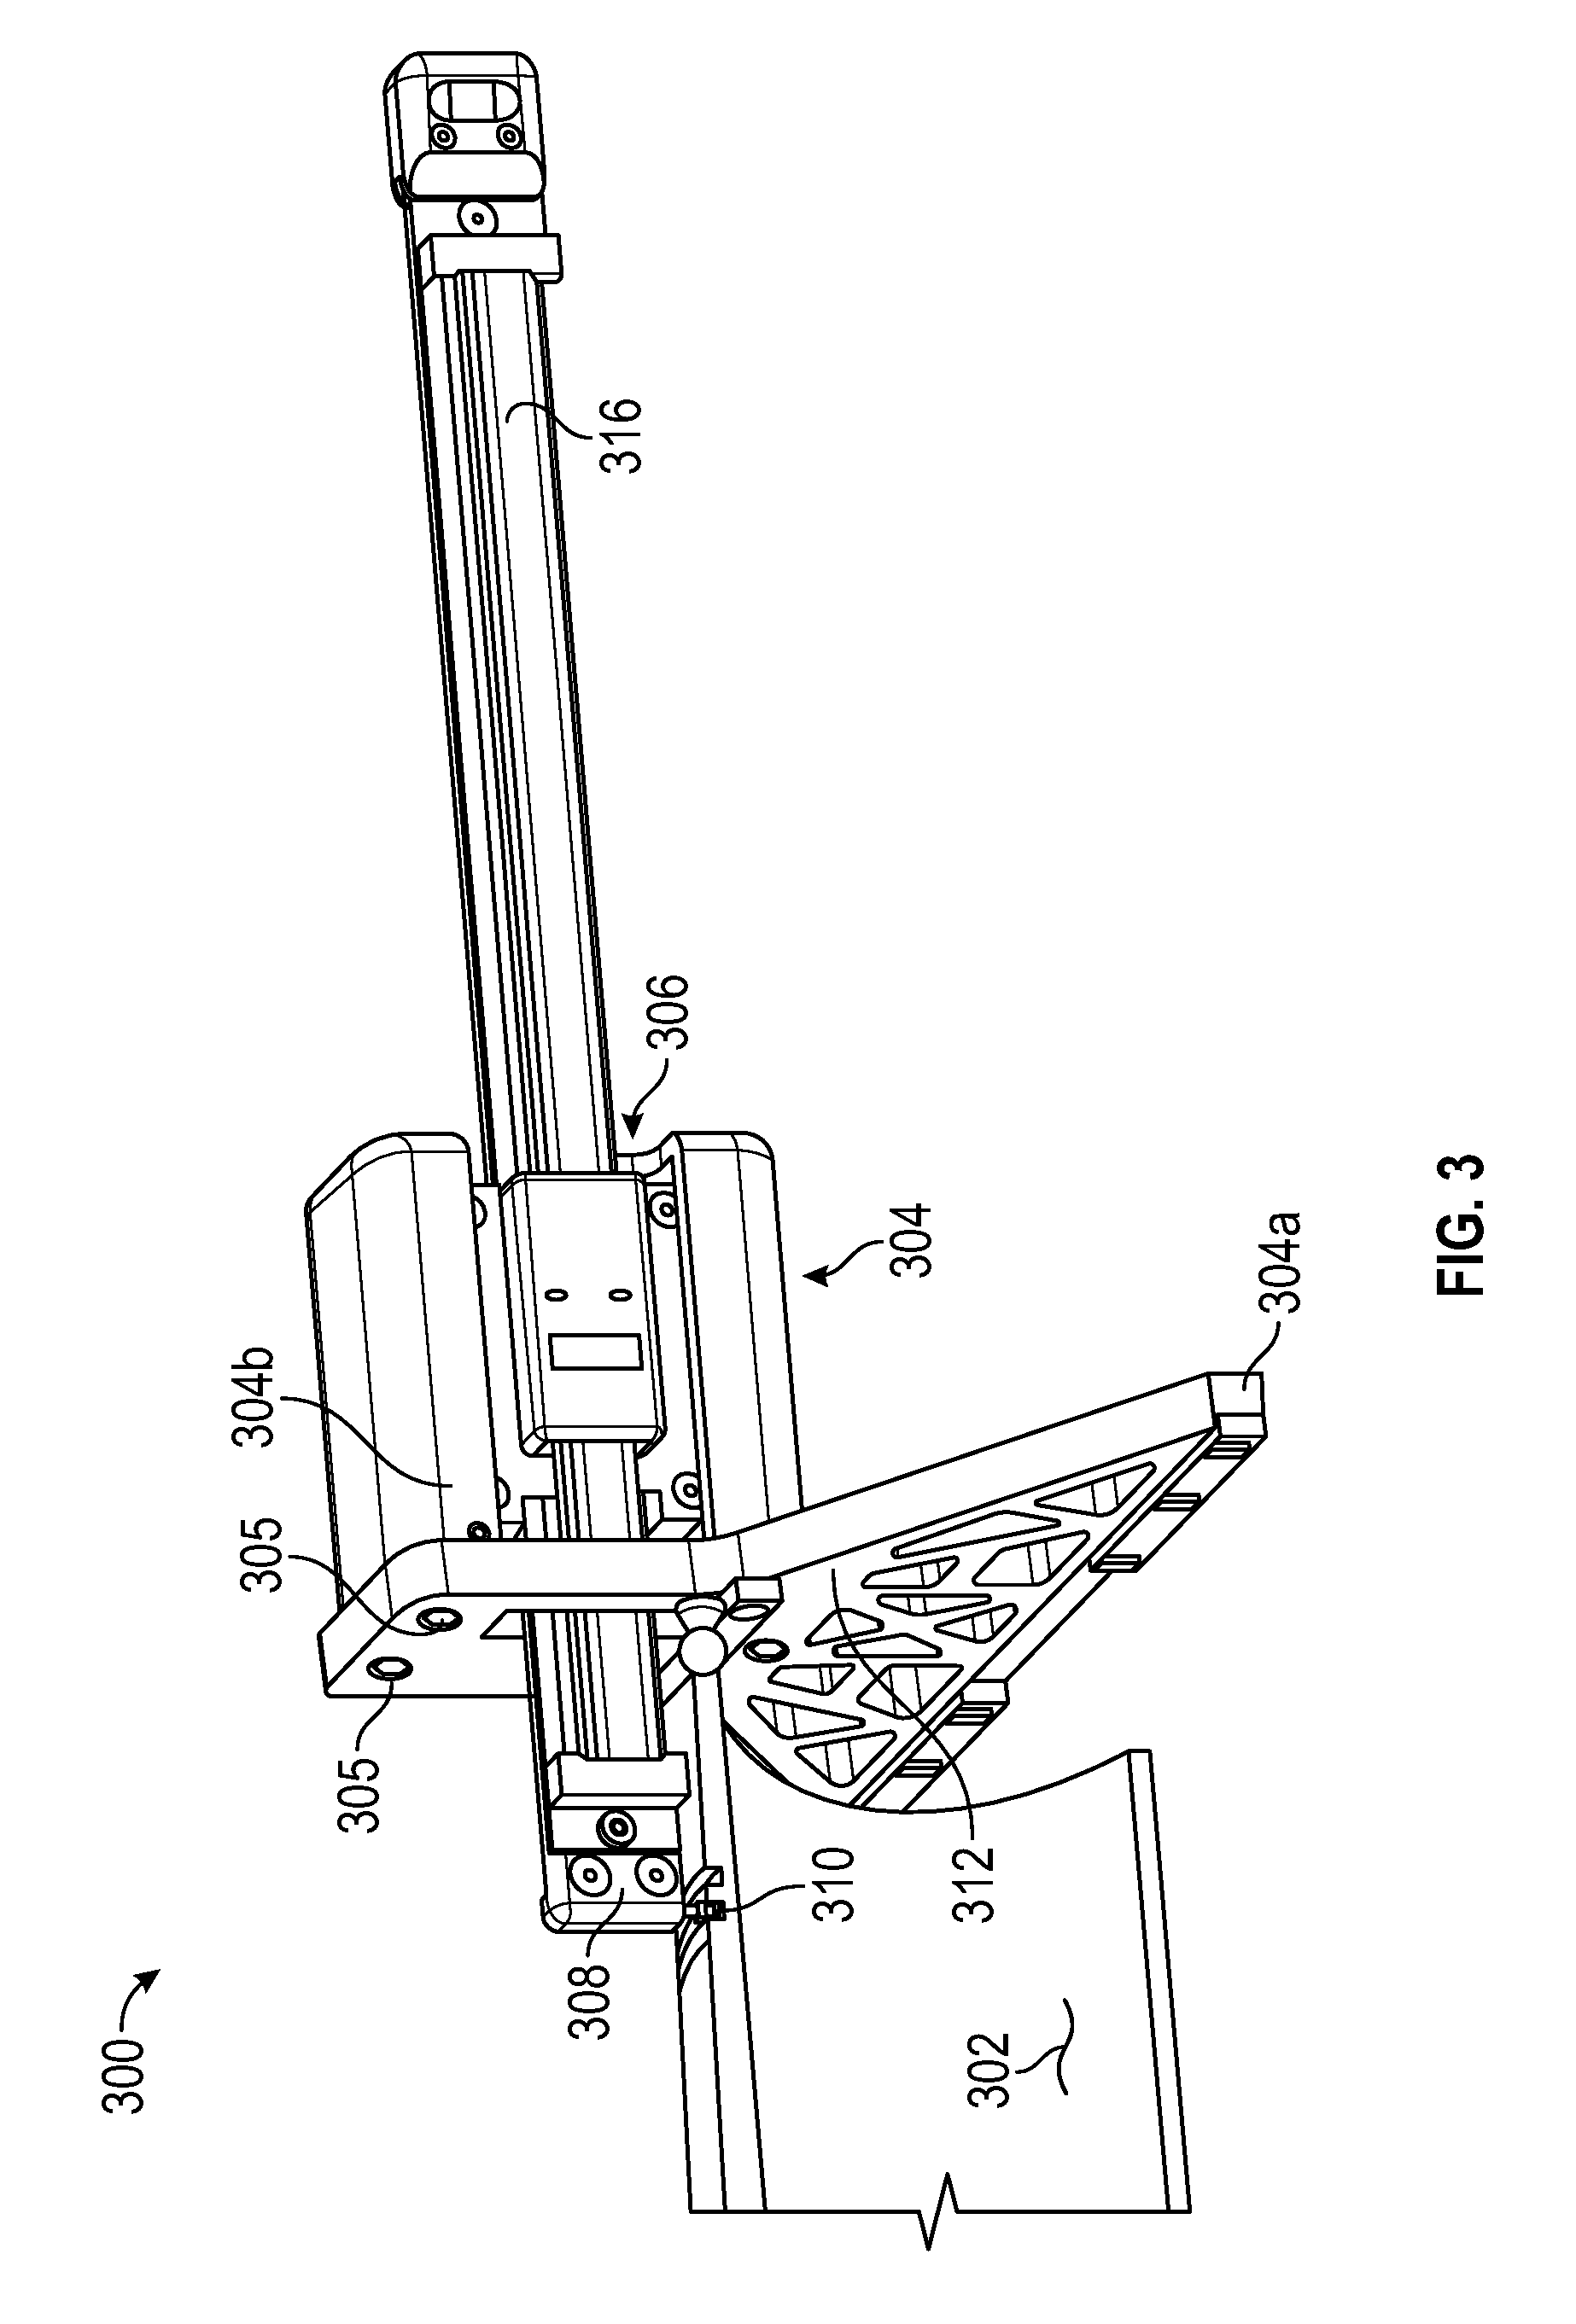 Thread Inspection Systems and Methods